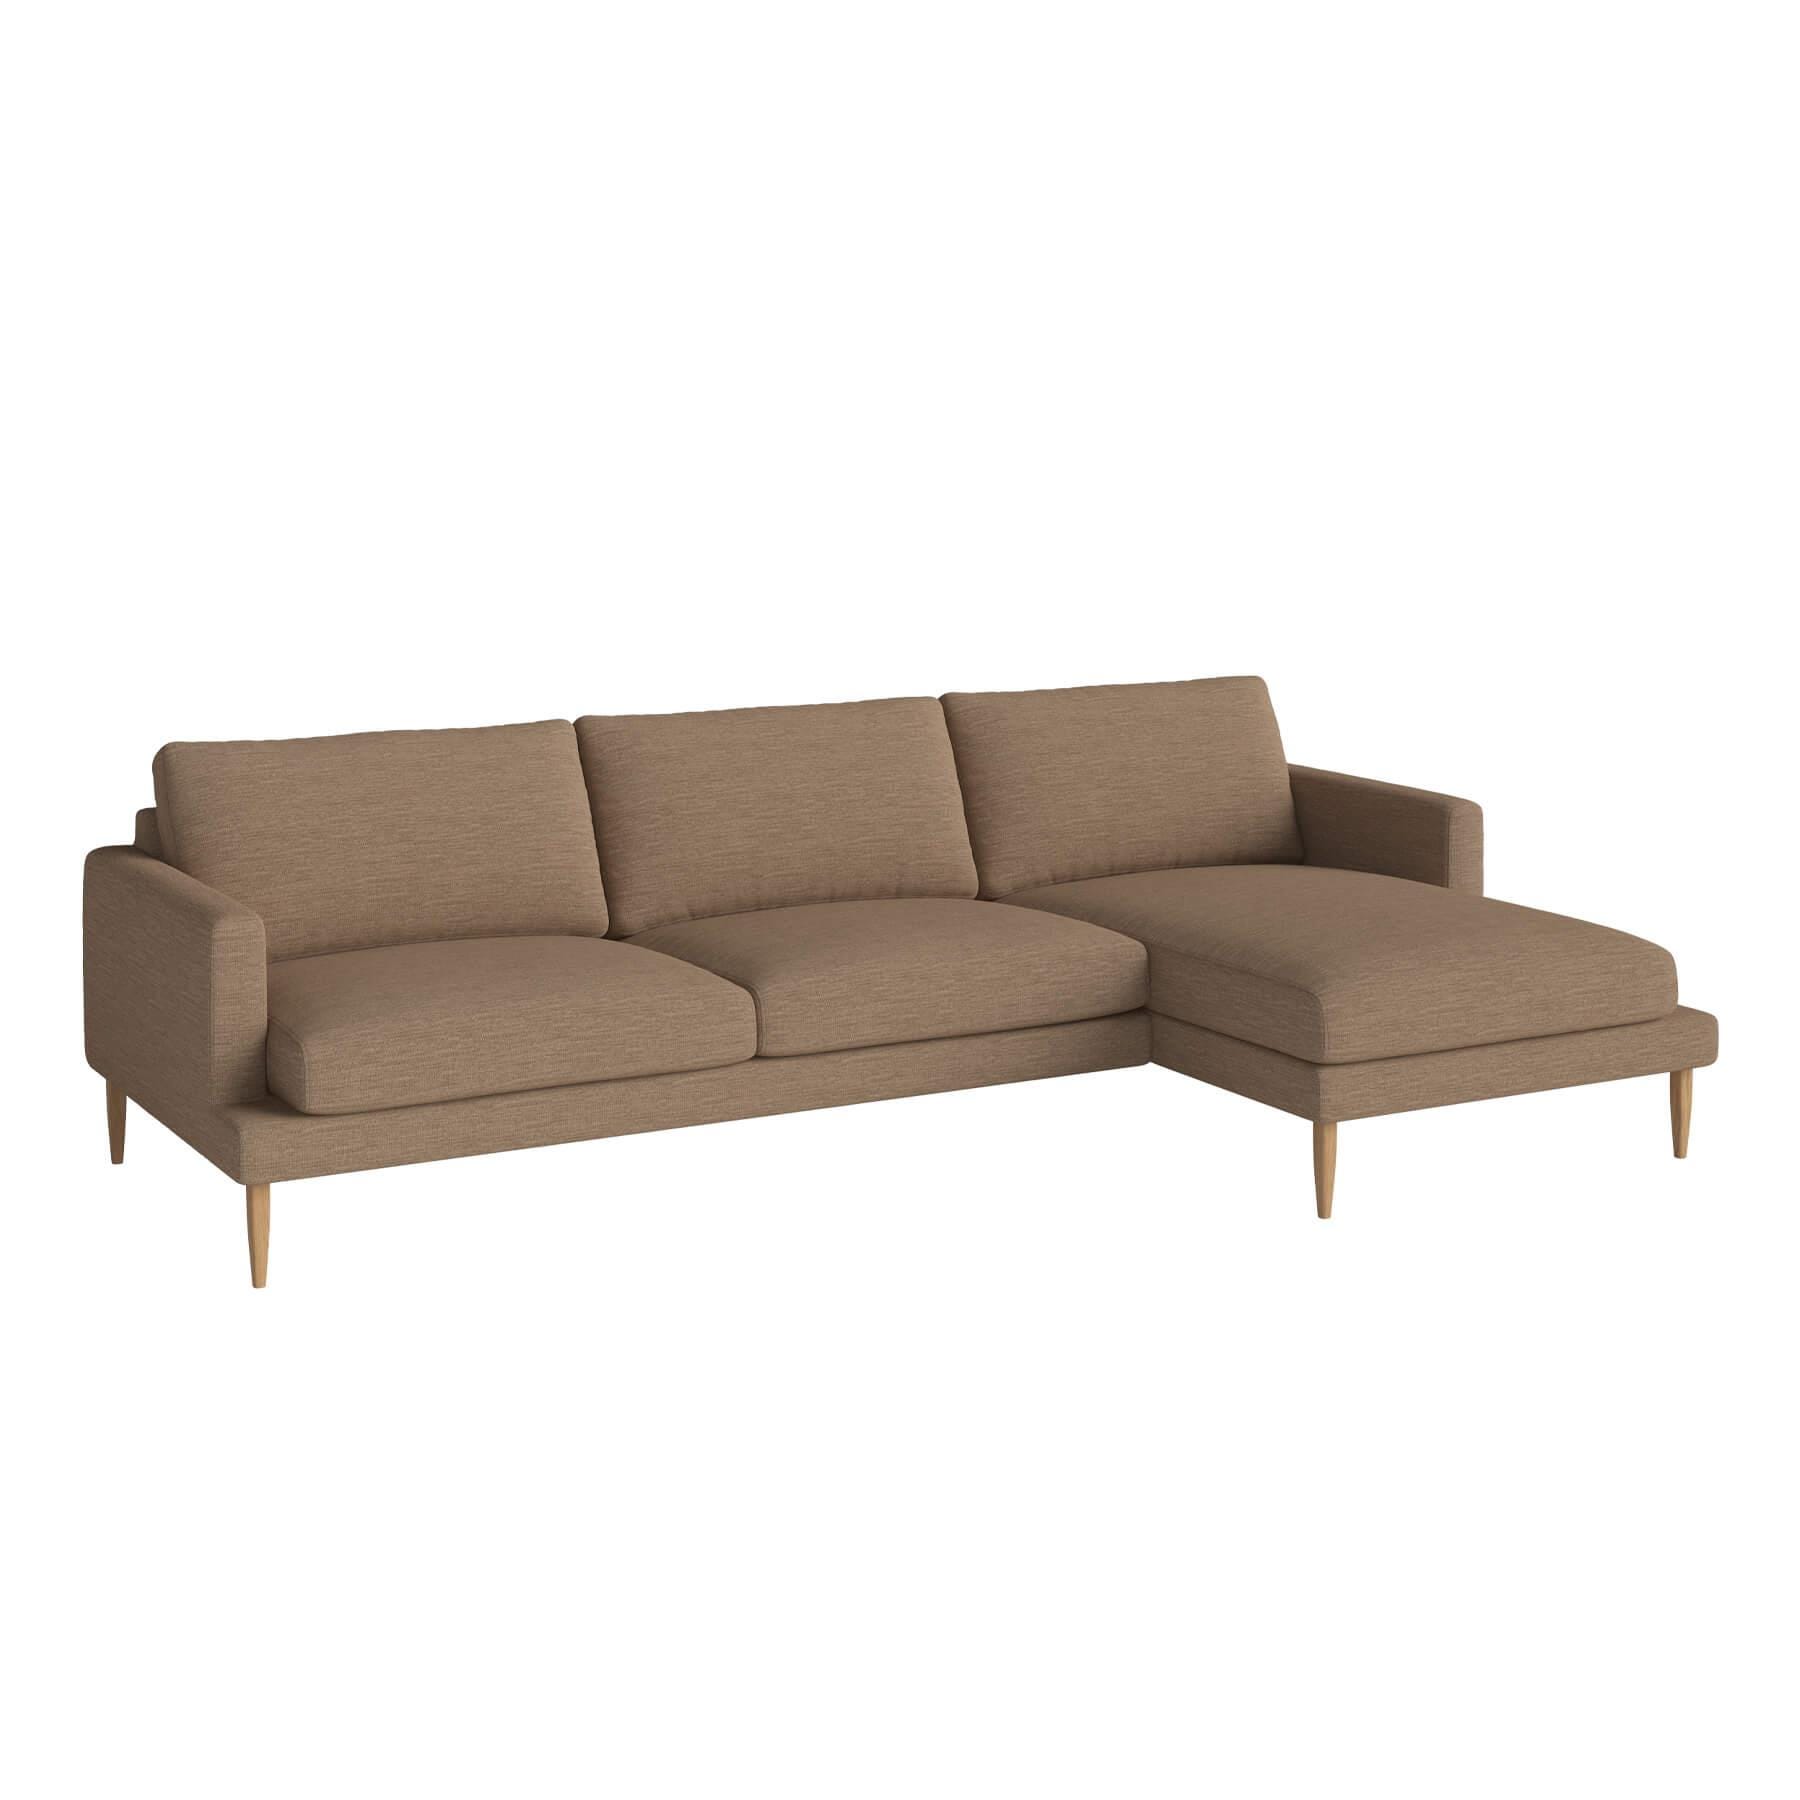 Bolia Veneda Sofa 35 Seater Sofa With Chaise Longue Oiled Oak Laine Light Brown Right Brown Designer Furniture From Holloways Of Ludlow